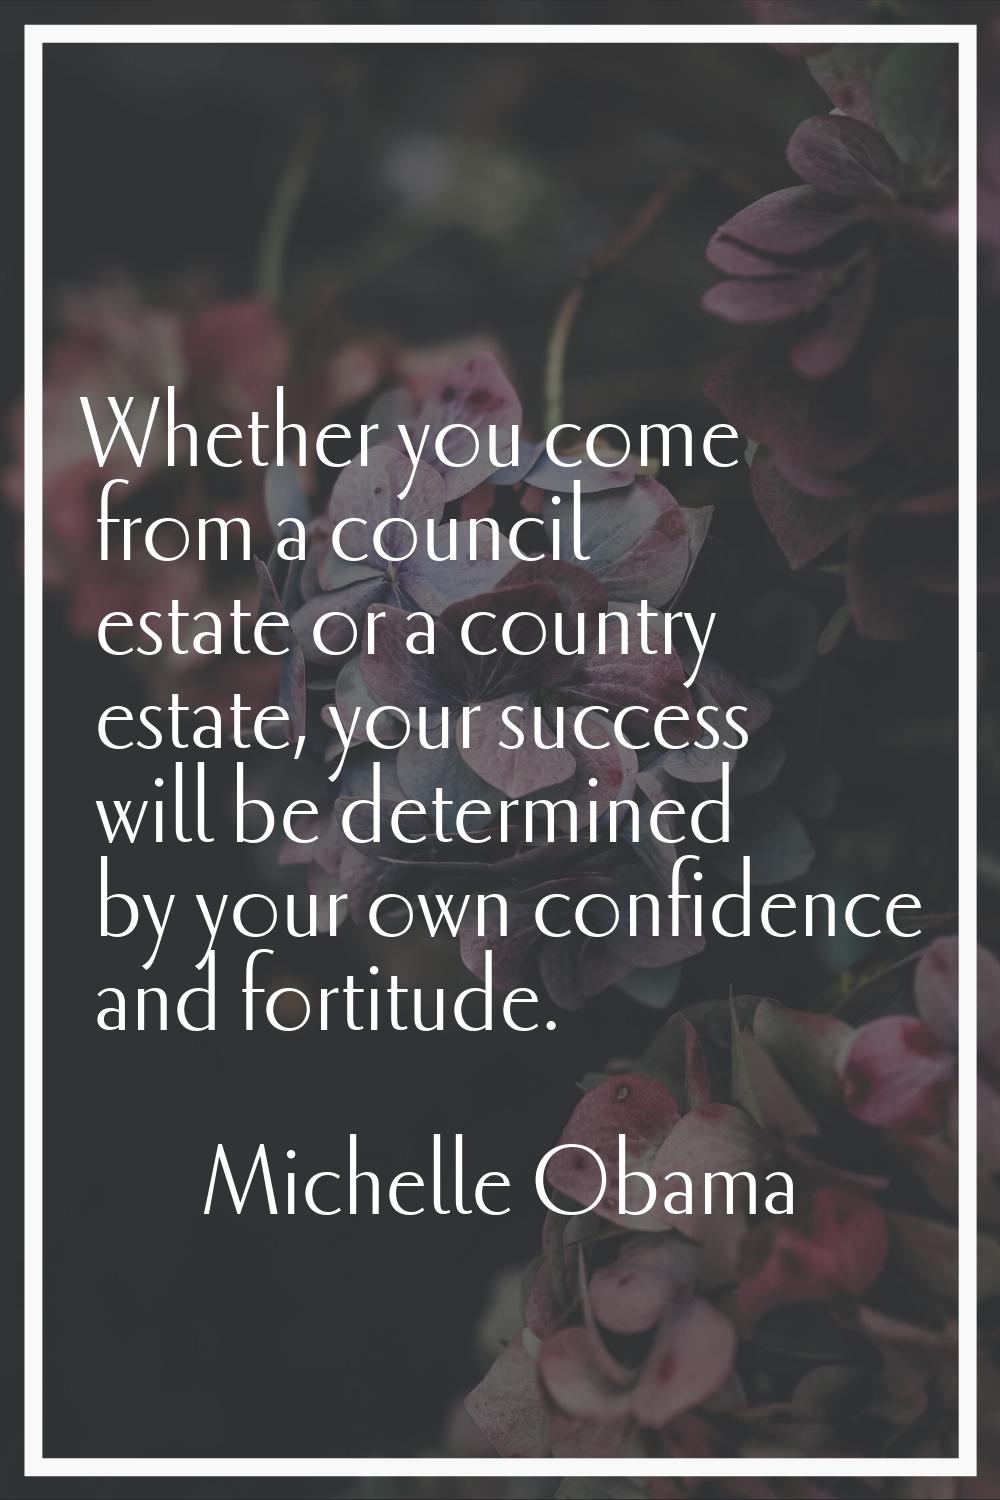 Whether you come from a council estate or a country estate, your success will be determined by your